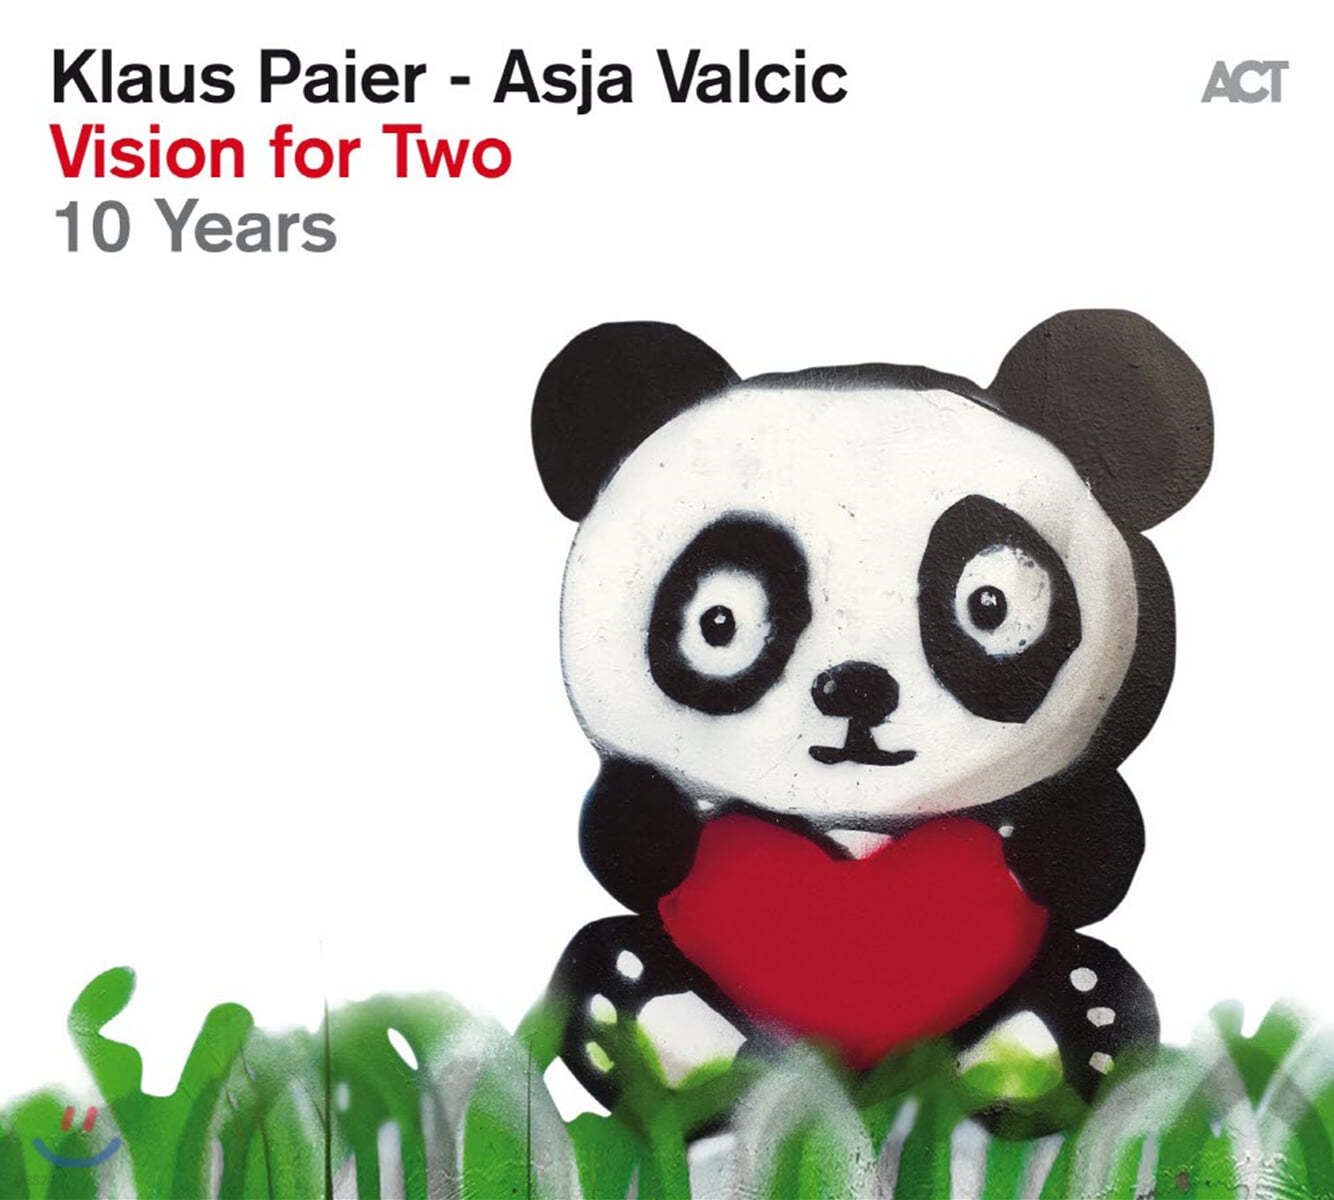 Klaus Paier & Asja Valcic (클라우스 파이어 & 아샤 발치치) - Visions for Two